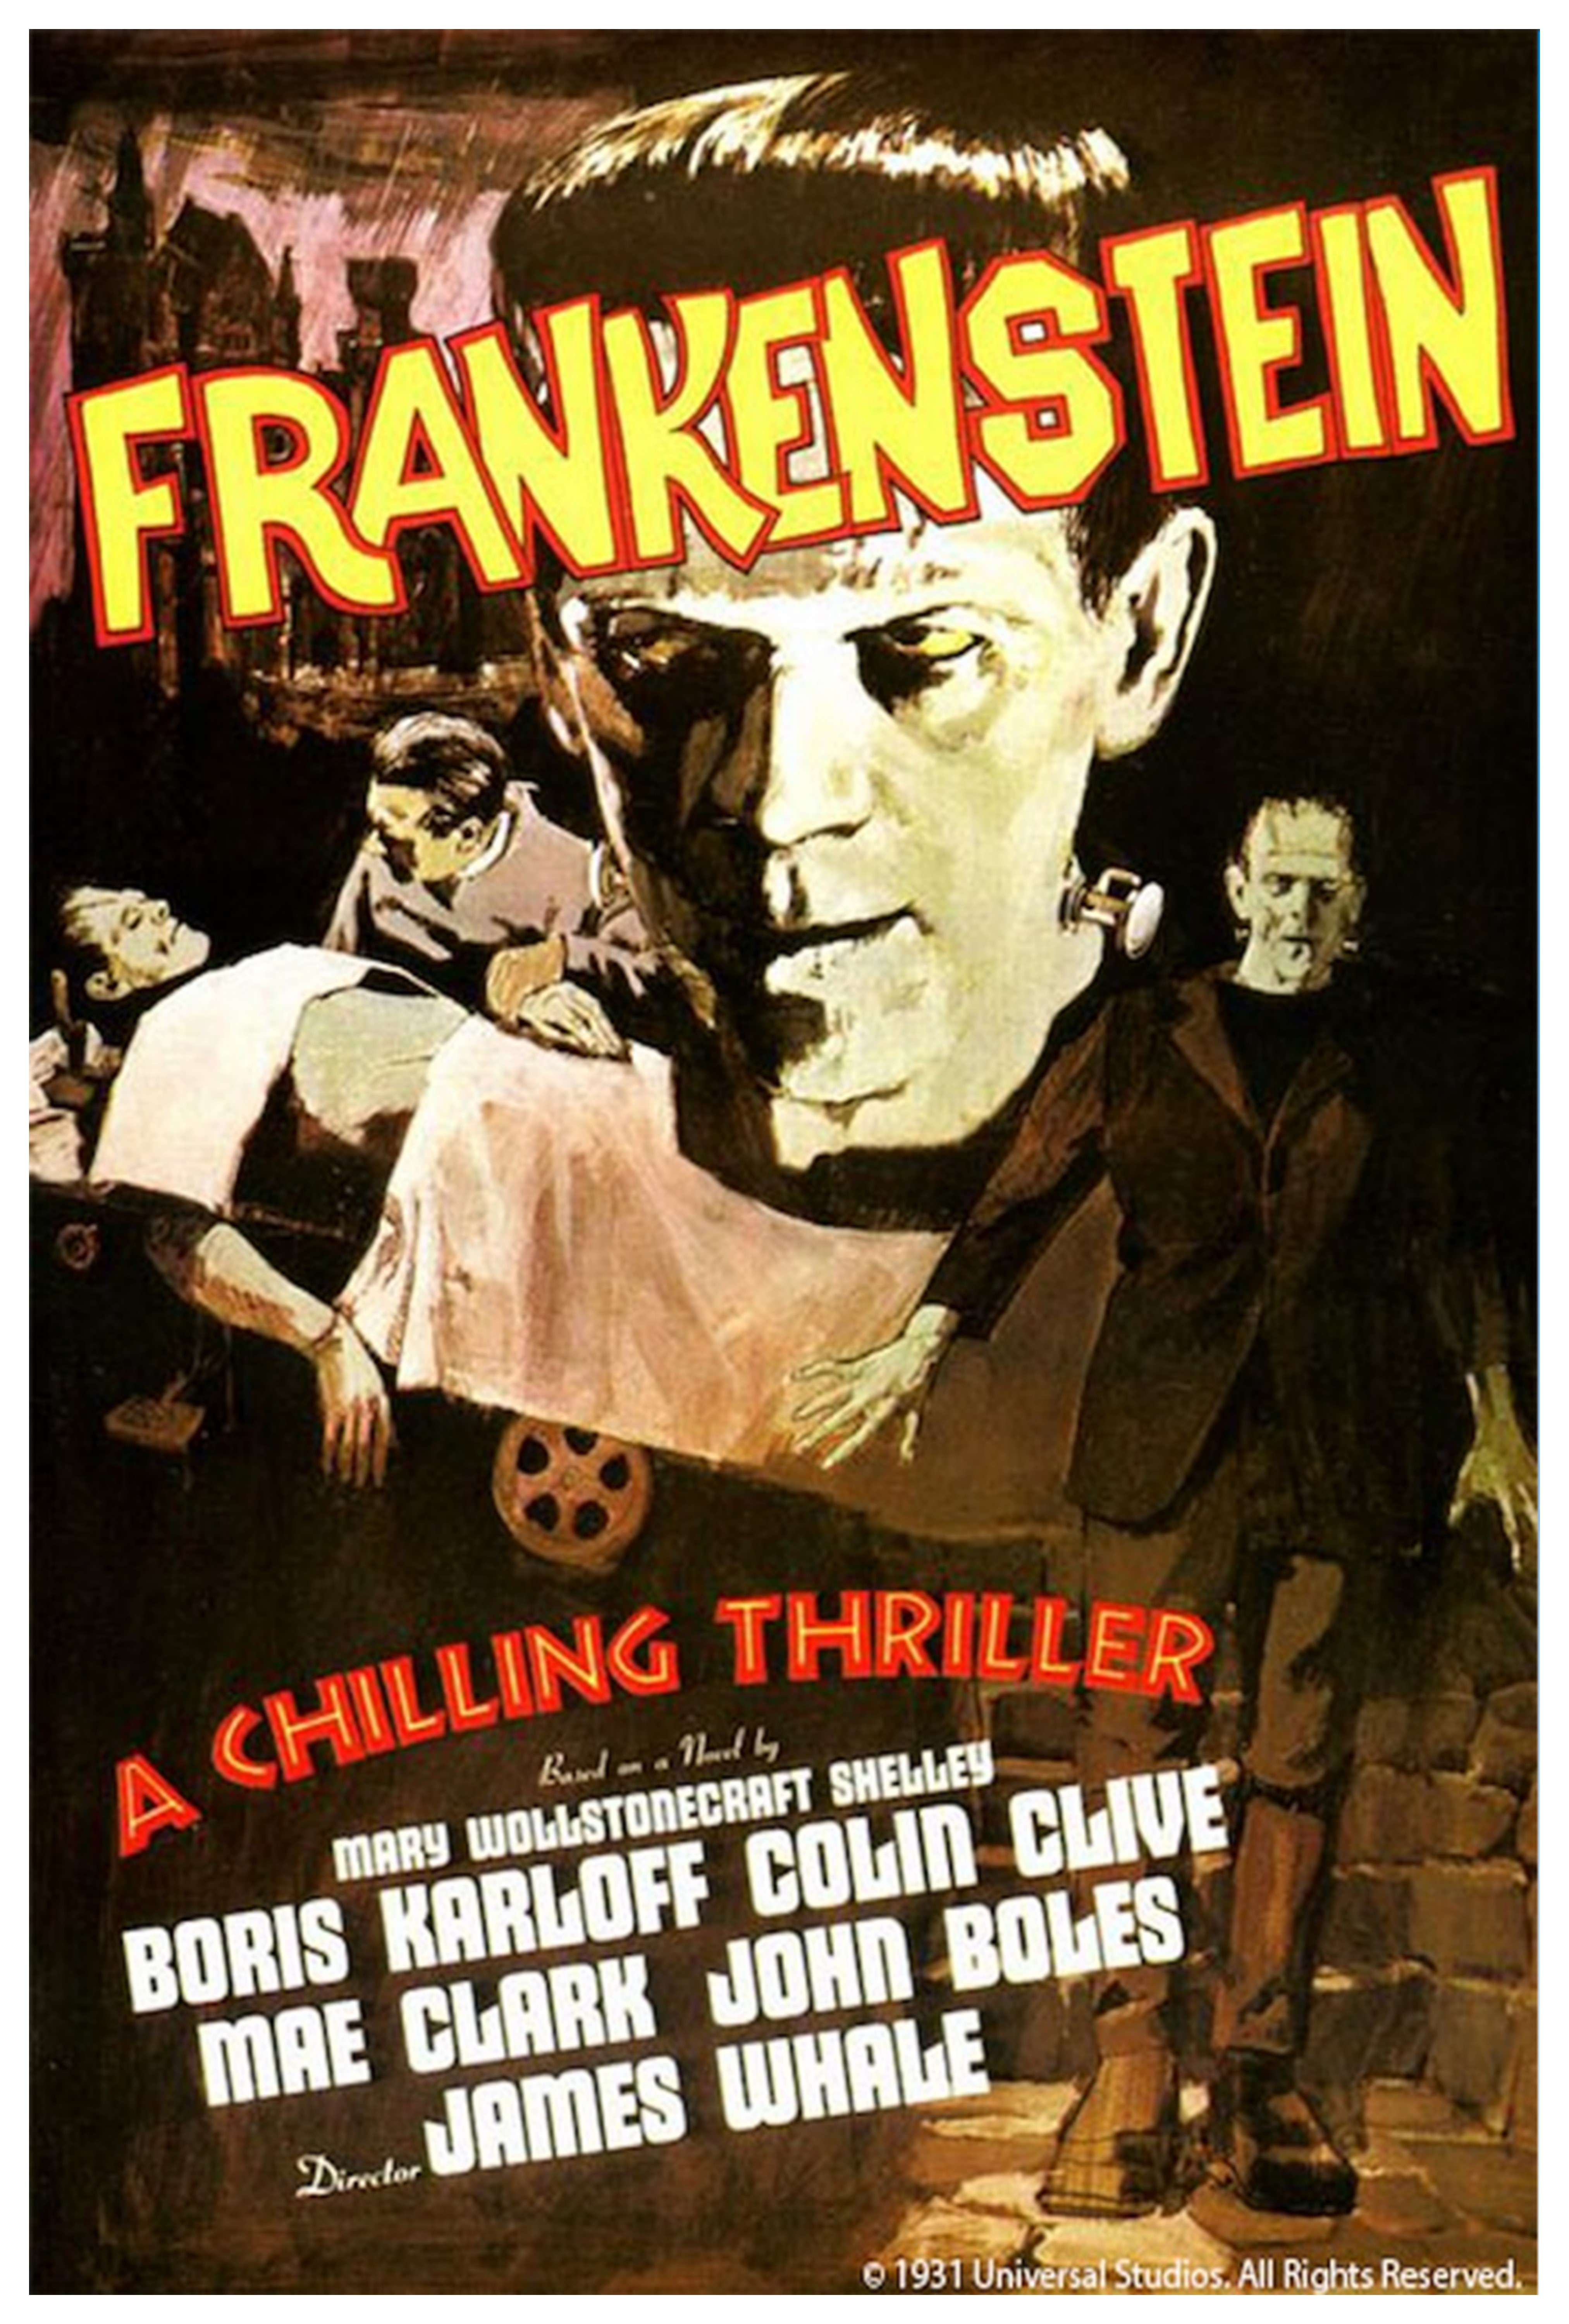 Film poster for Frankenstein featuring yellow, red, and white texts on a dark background, including an image of Frankenstein's monster peering out at the viewer.